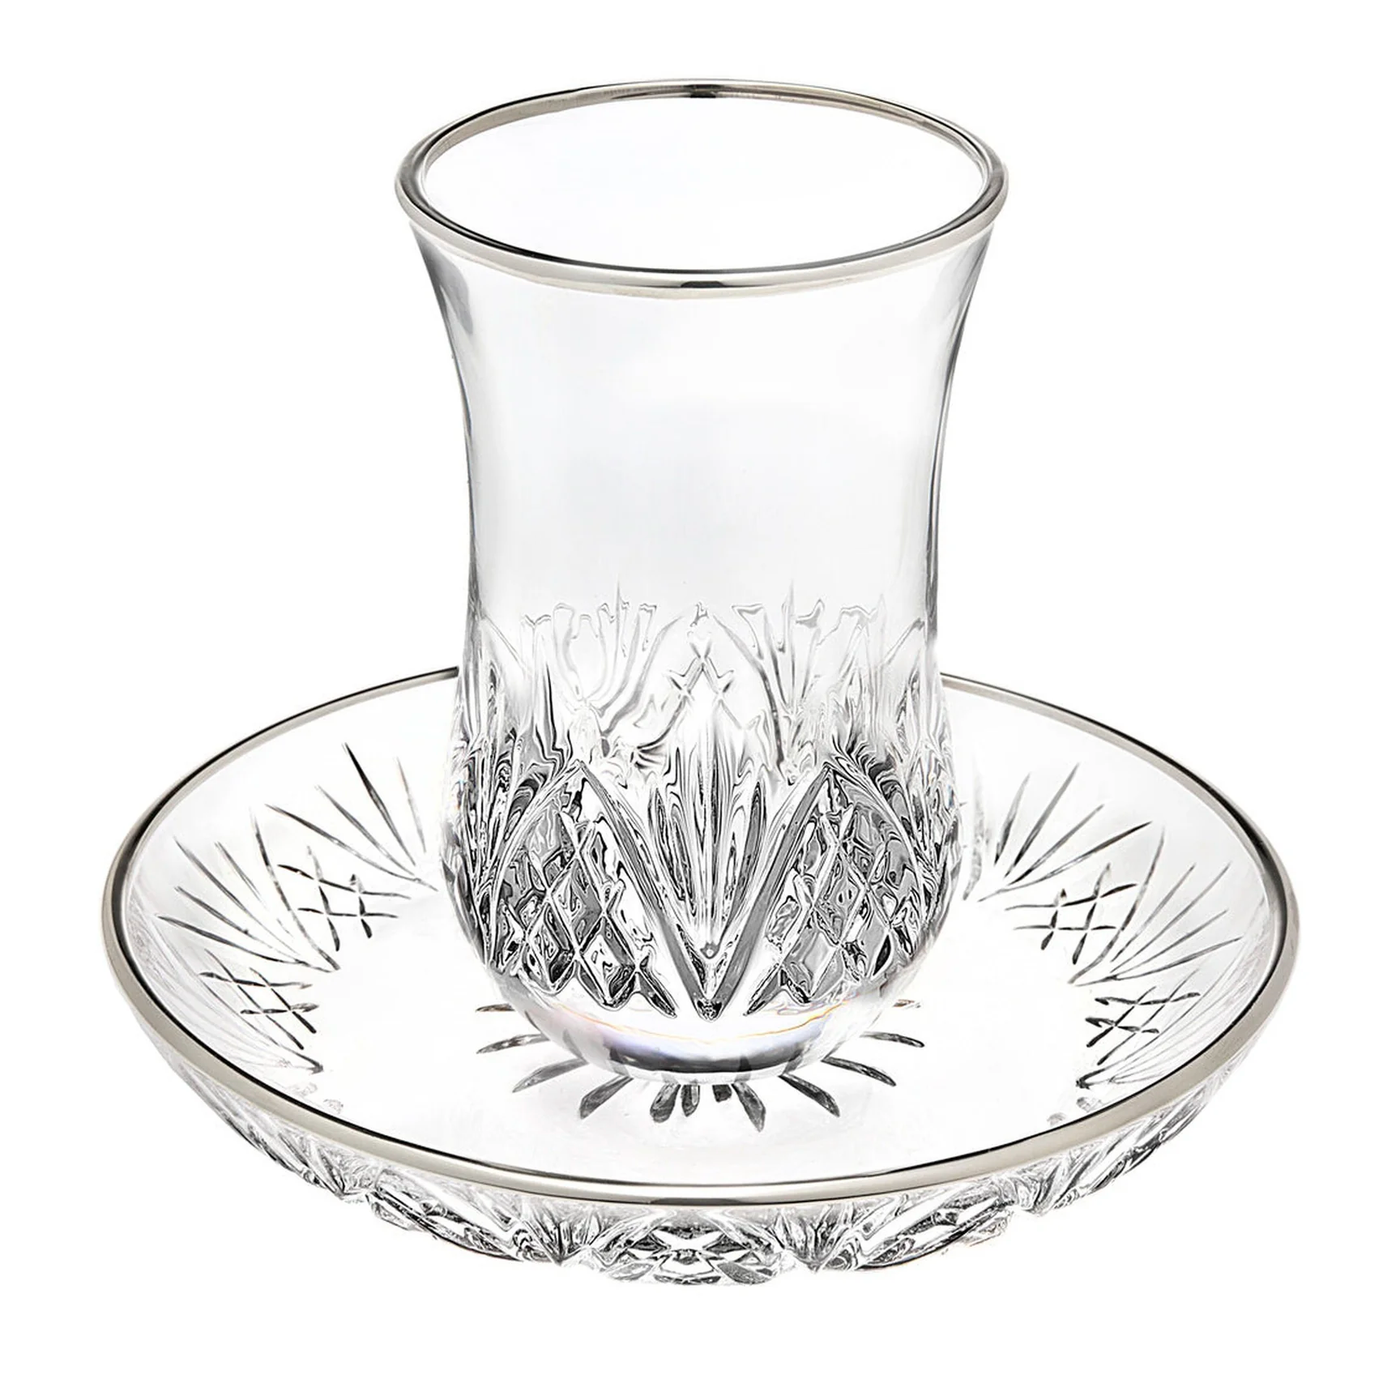 Dublin Two Piece Platinum Rim Kiddush Cup (1 Count) - Set With Style